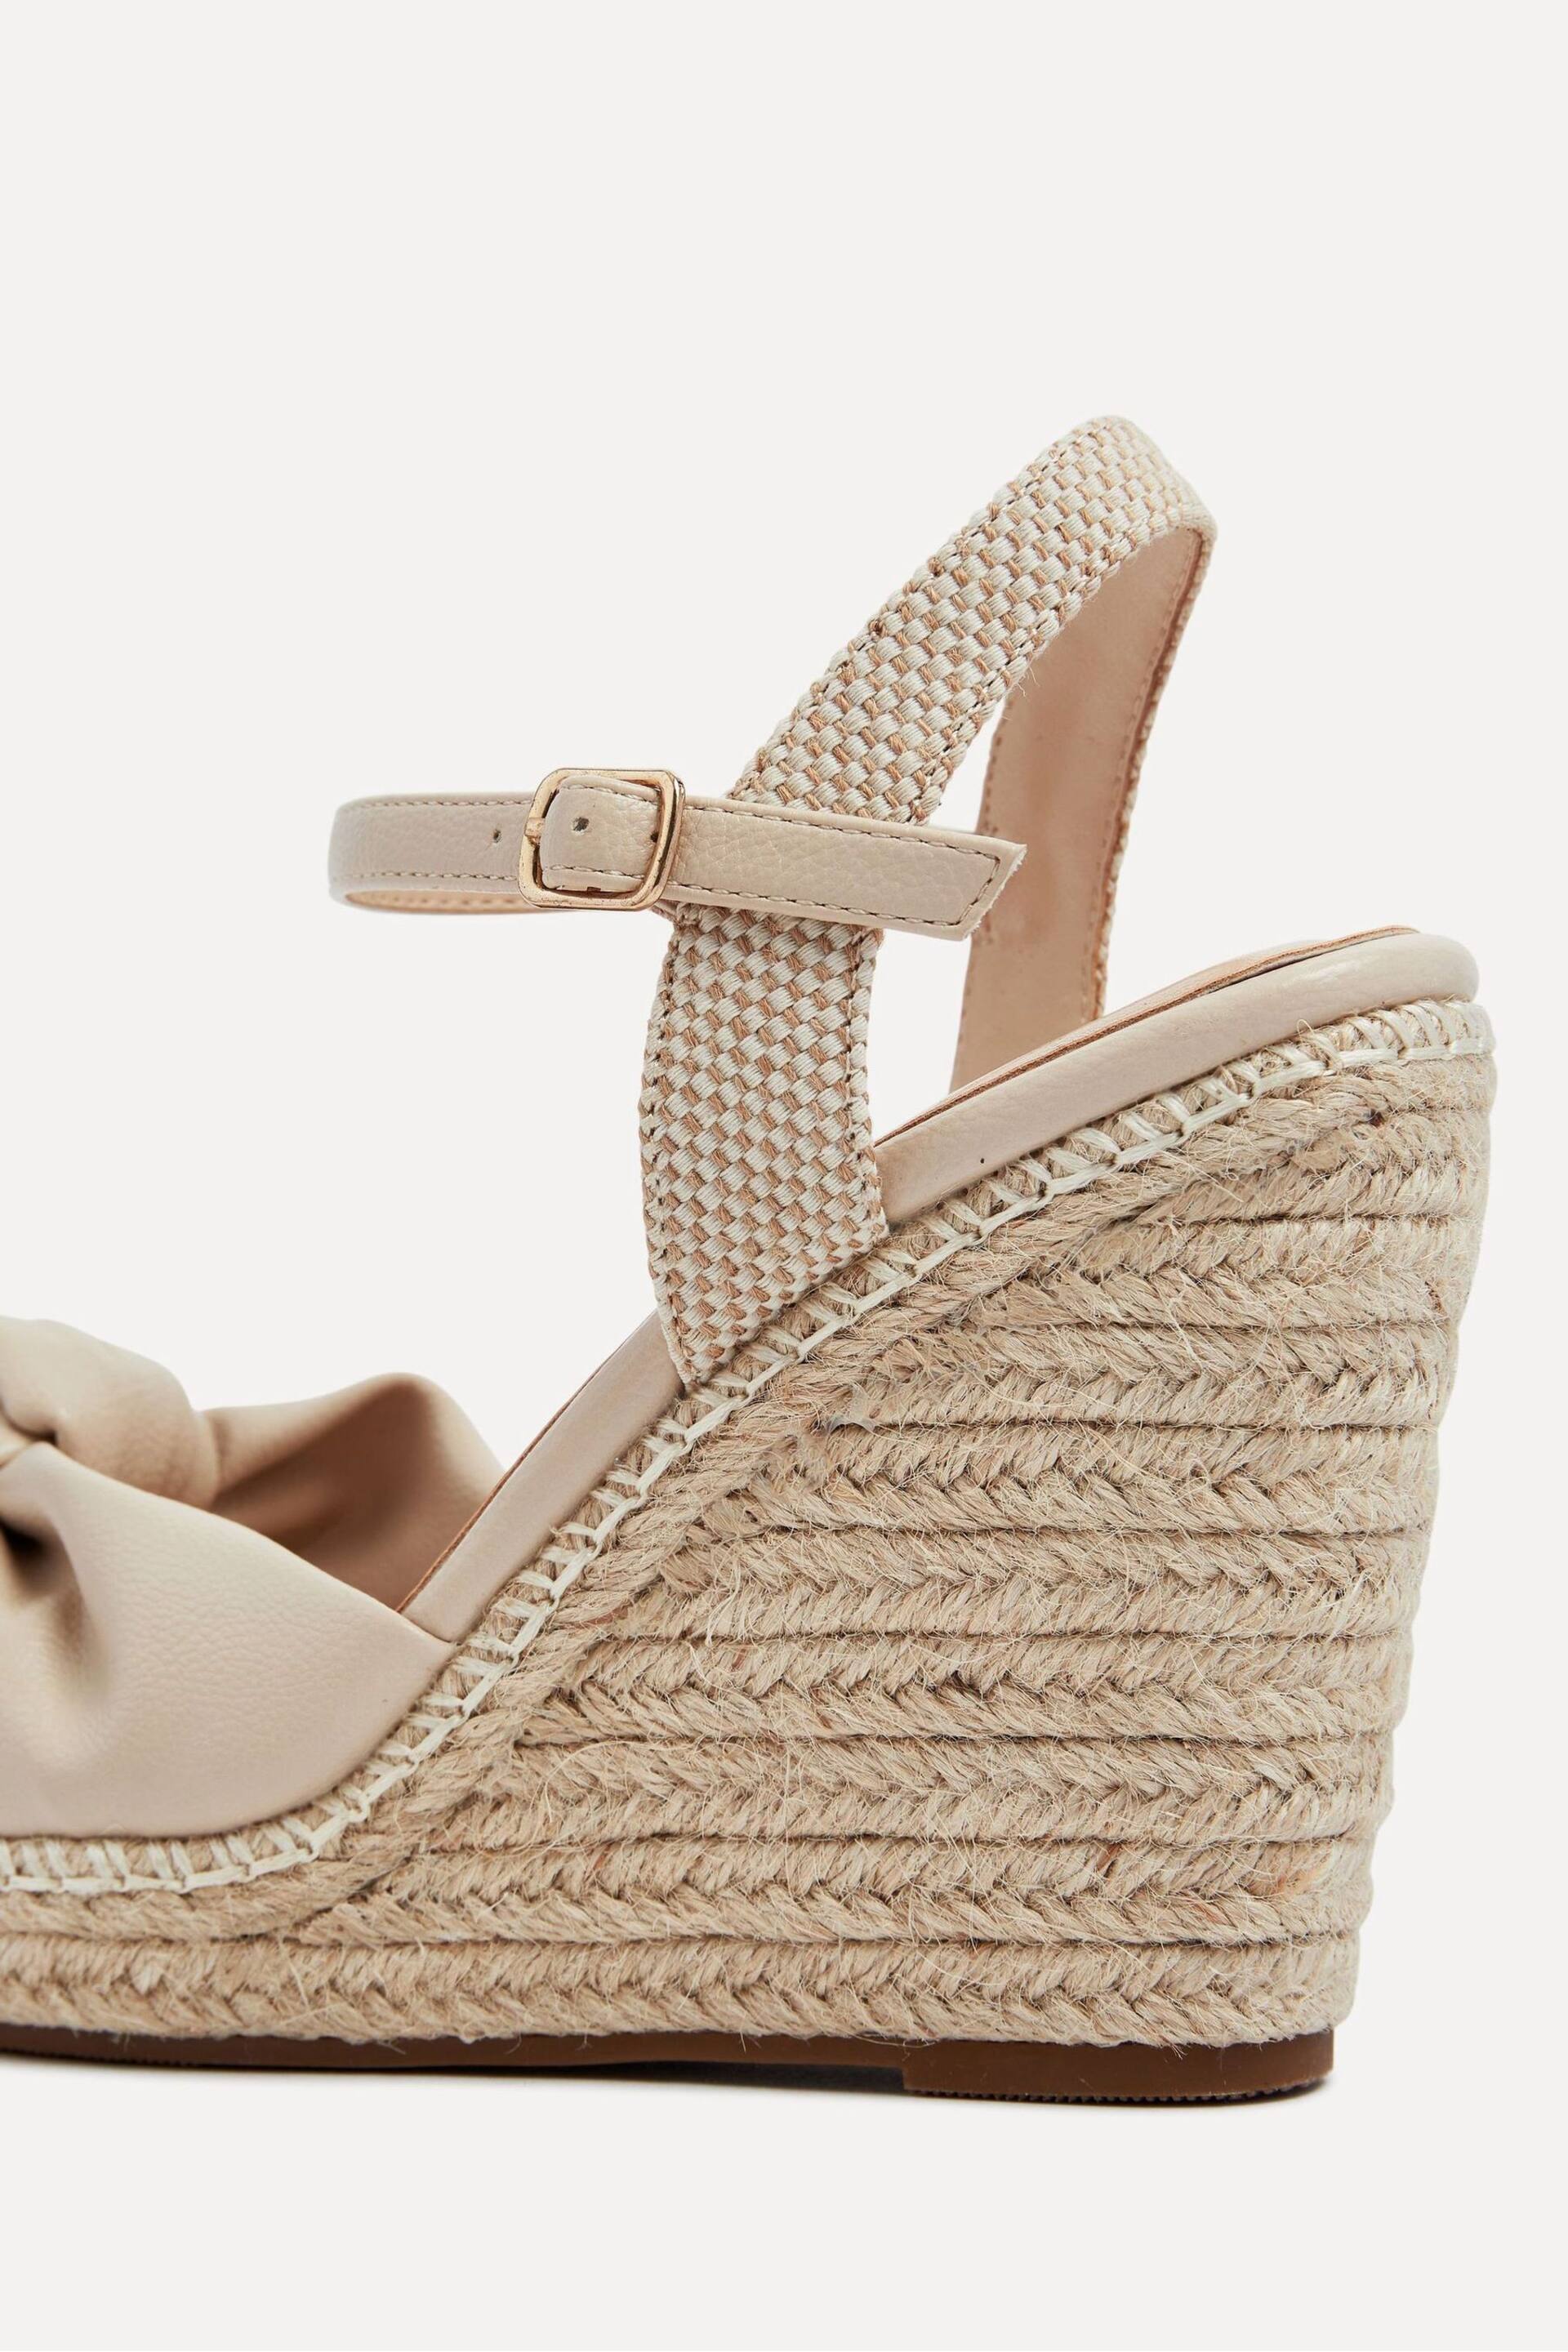 Linzi Cream Rio Rope Platform Wedge Espadrille With Knotted Front Strap - Image 4 of 5